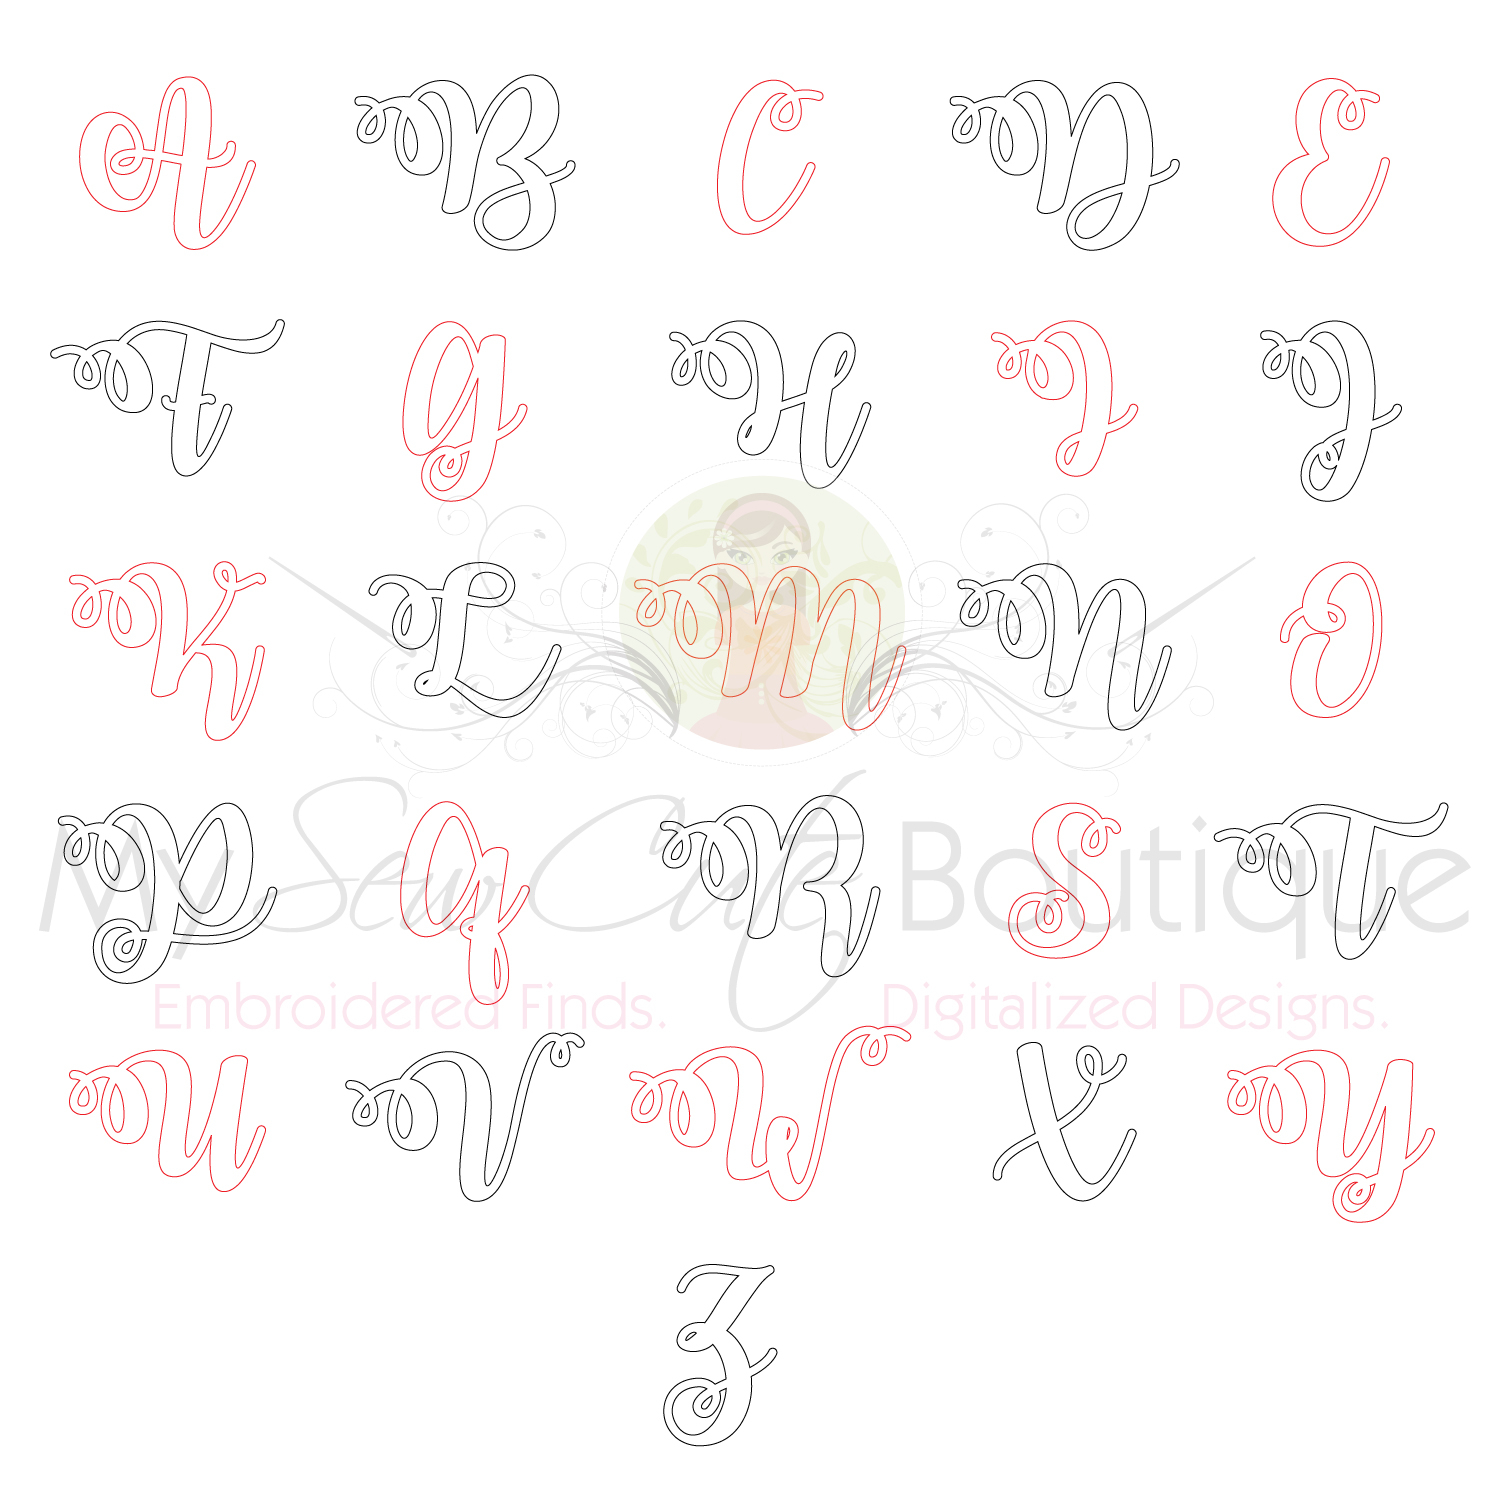 Embroidery Alphabet Patterns Raggy Applique Fonts Embroidery Monogram Letters Designs Raggy Embroidery Font 4 Sizes Instant Download